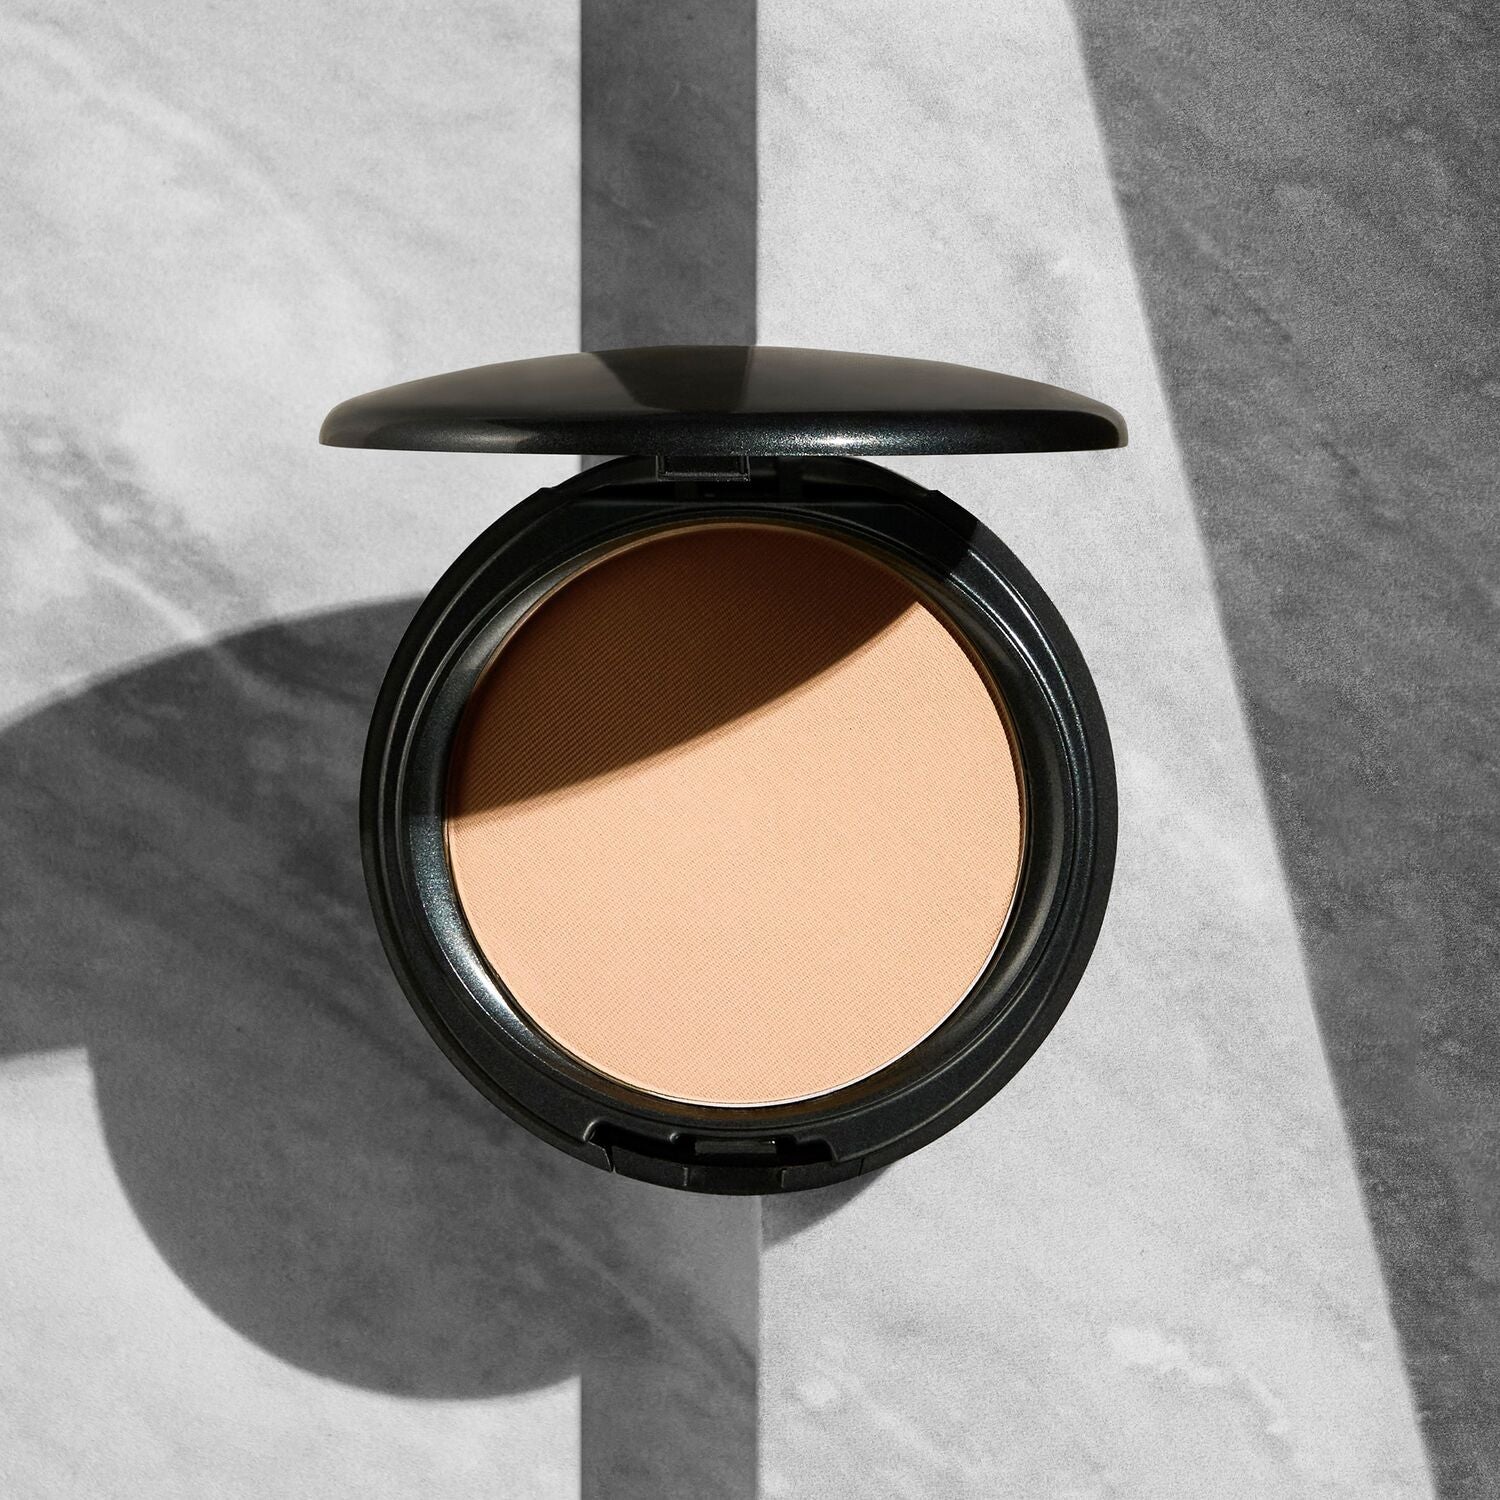 Coverfx Pressed Mineral Foundation in shade F2